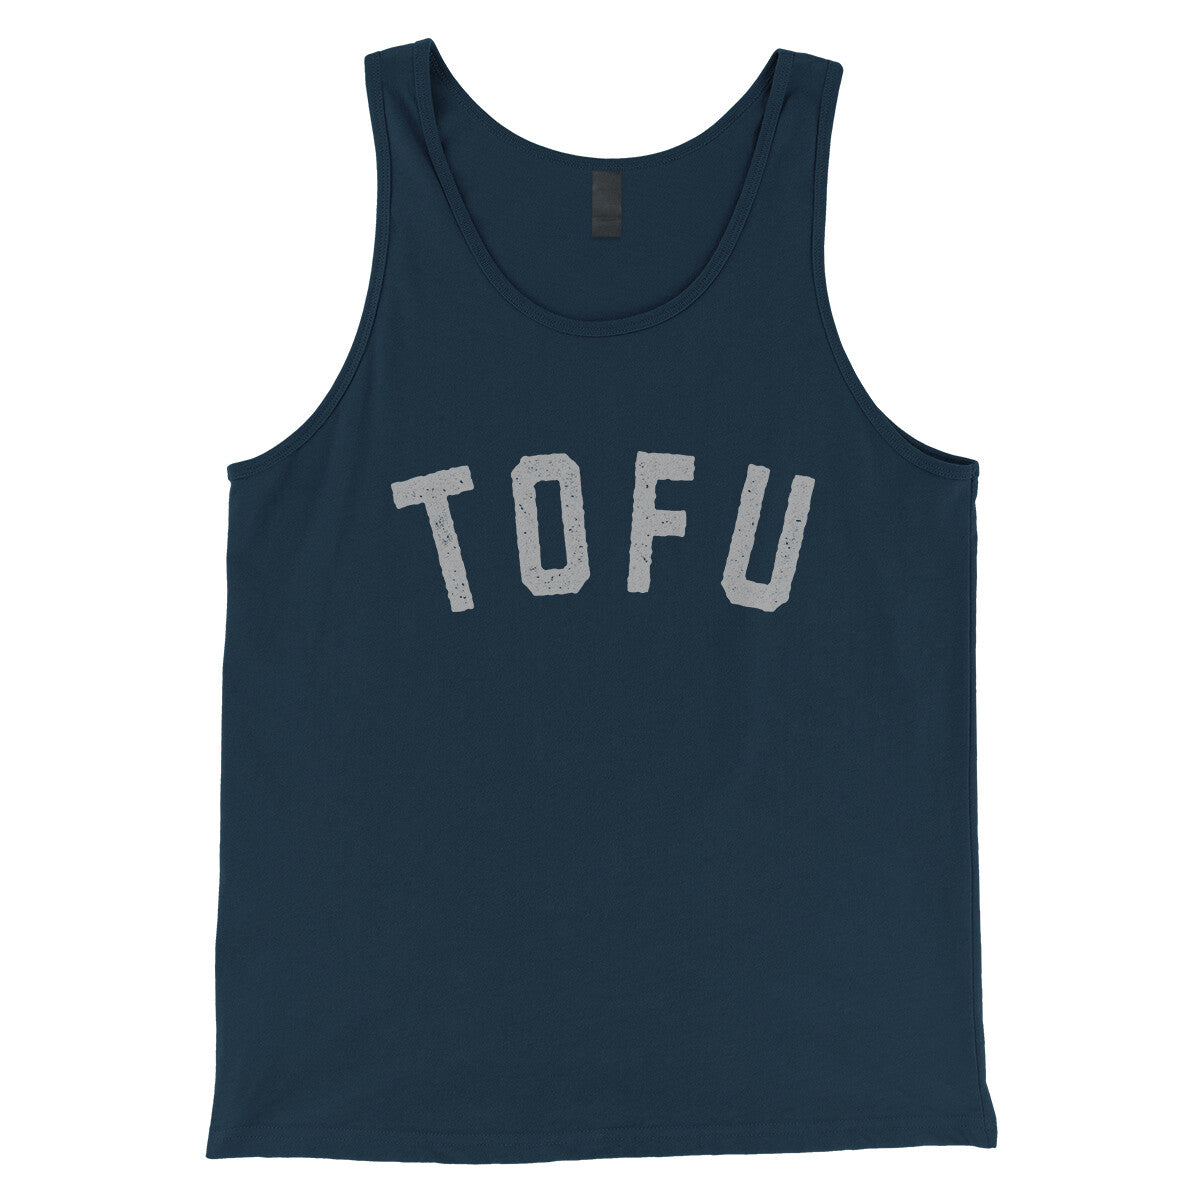 Tofu in Navy Color